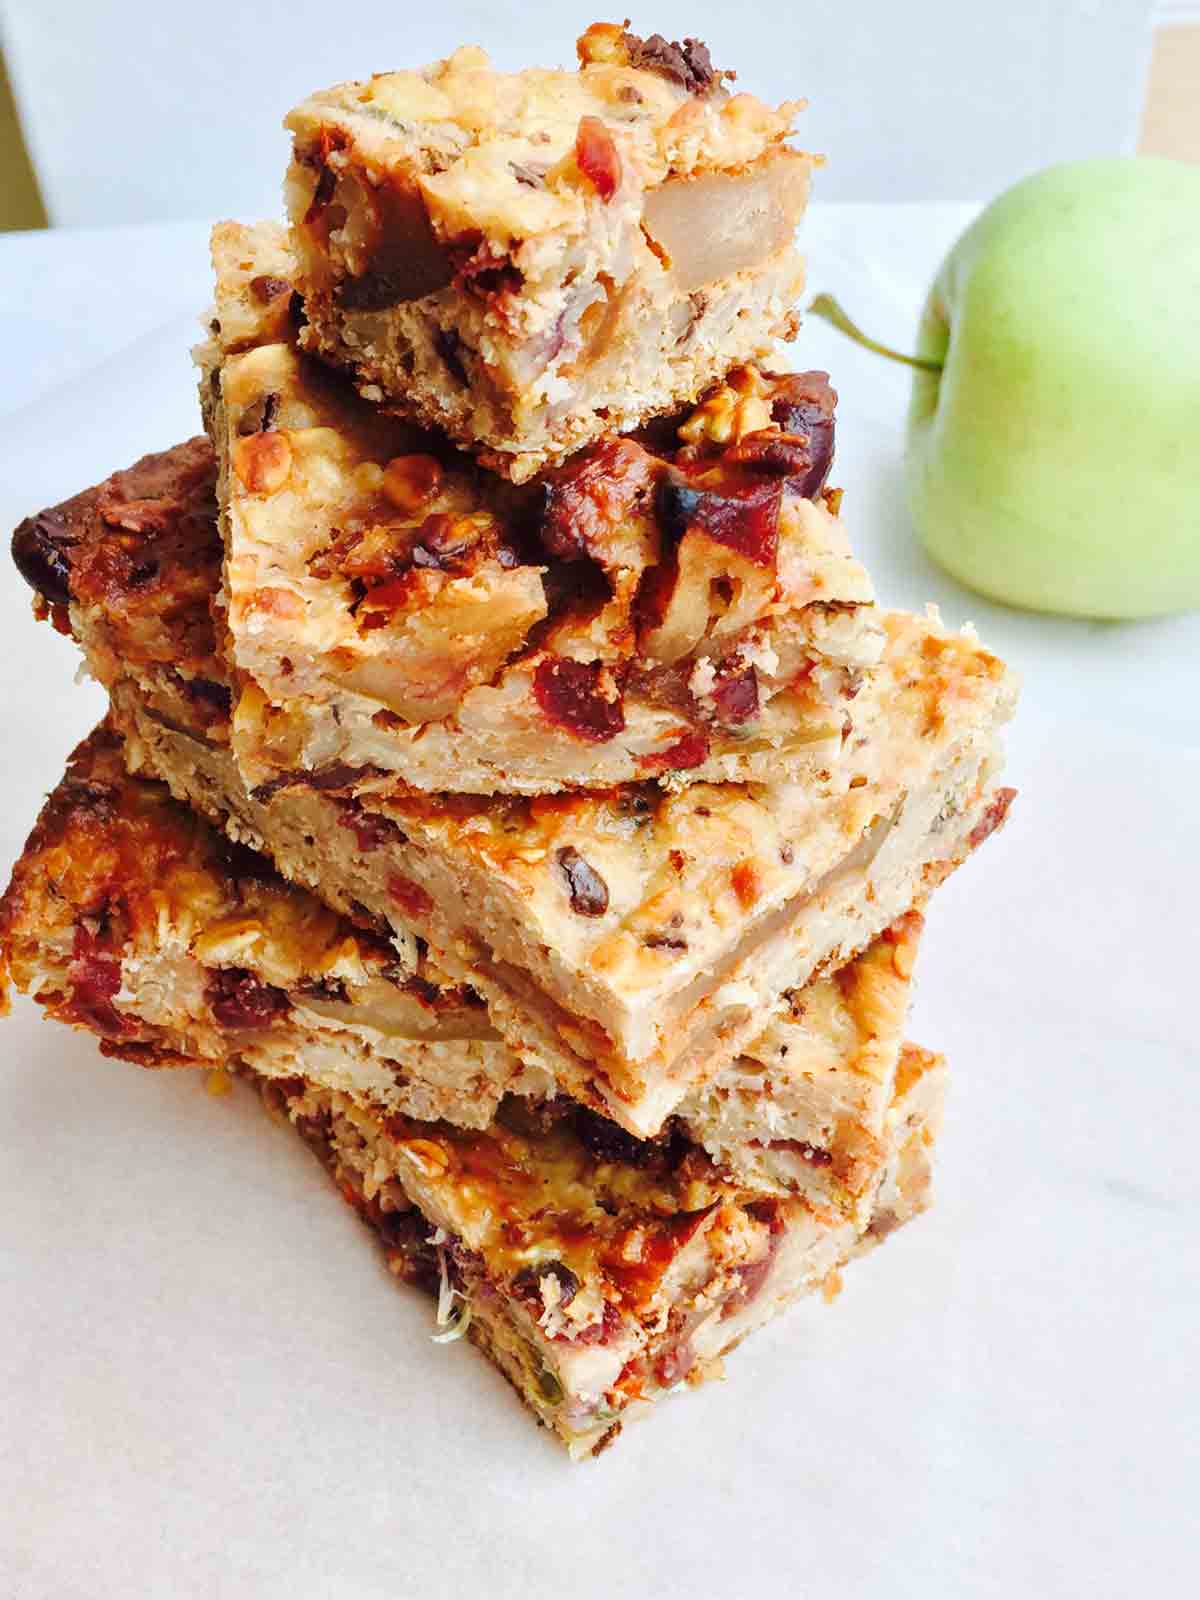 A tower of apple baked oats slices on a white surface.